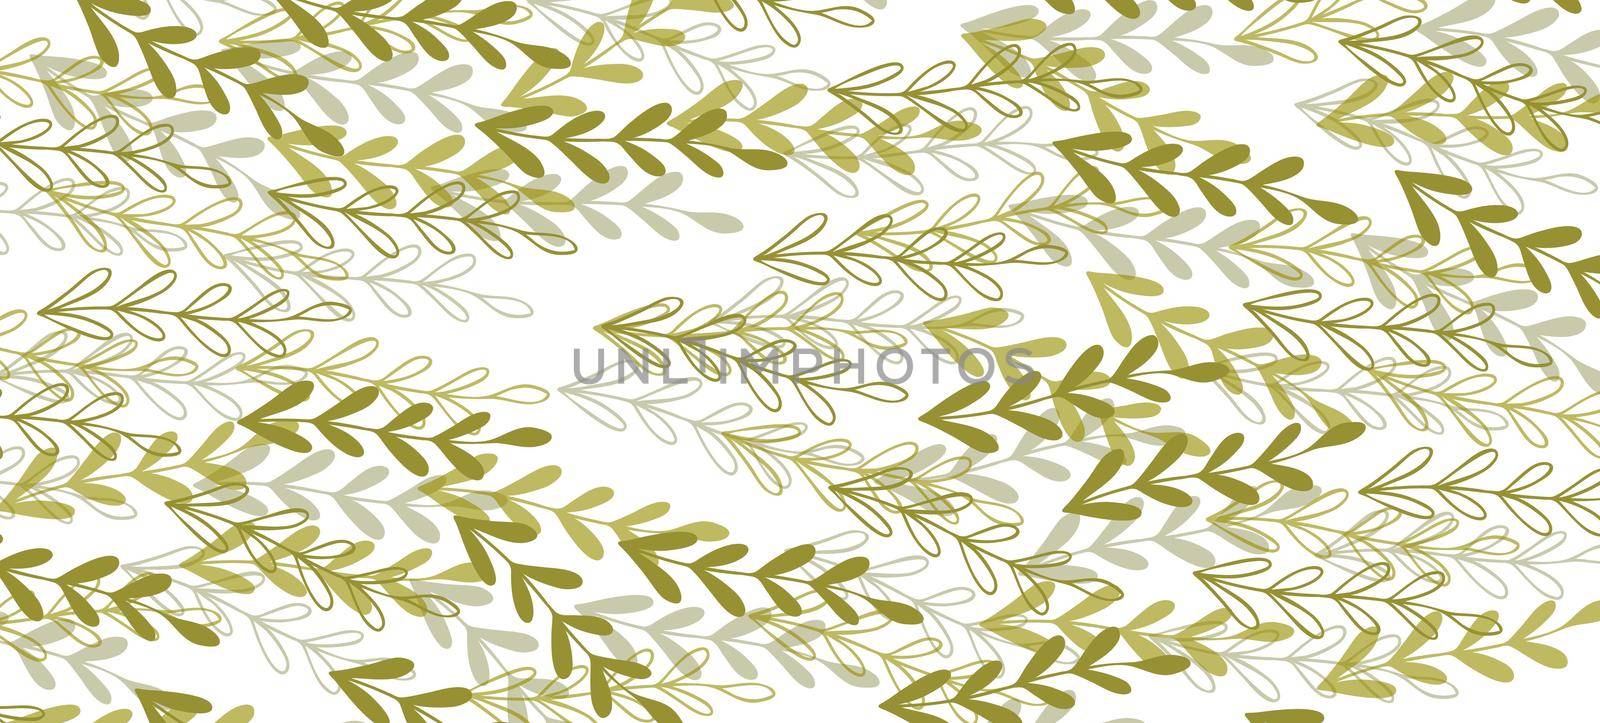 Floral web banner with drawn color exotic leaves. Nature concept design. Modern floral compositions with summer branches. Vector illustration on the theme of ecology, natura, environment.